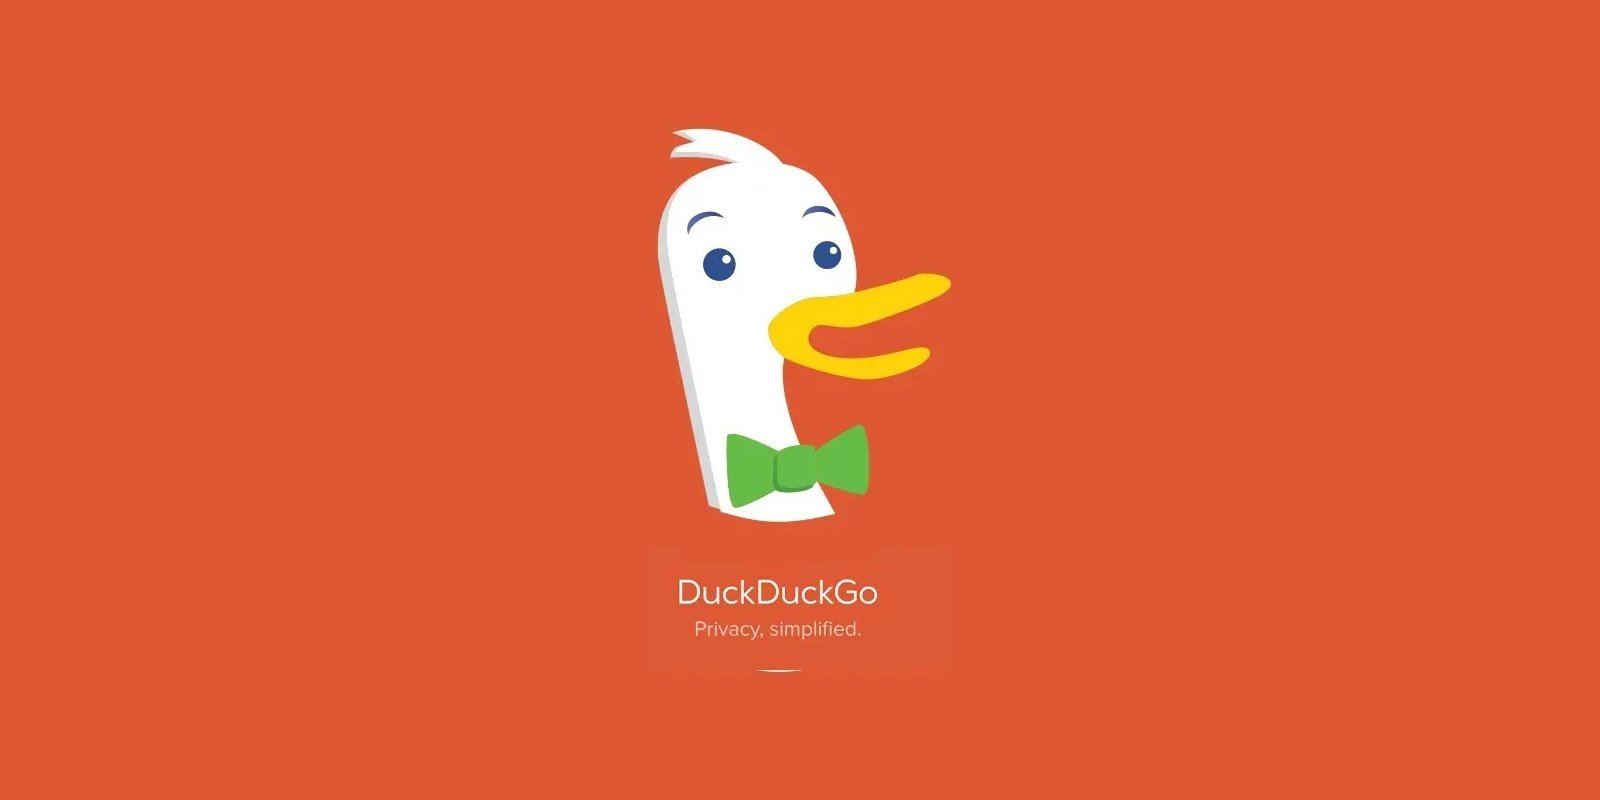 DuckDuckGo browser allows Microsoft trackers due to search agreement